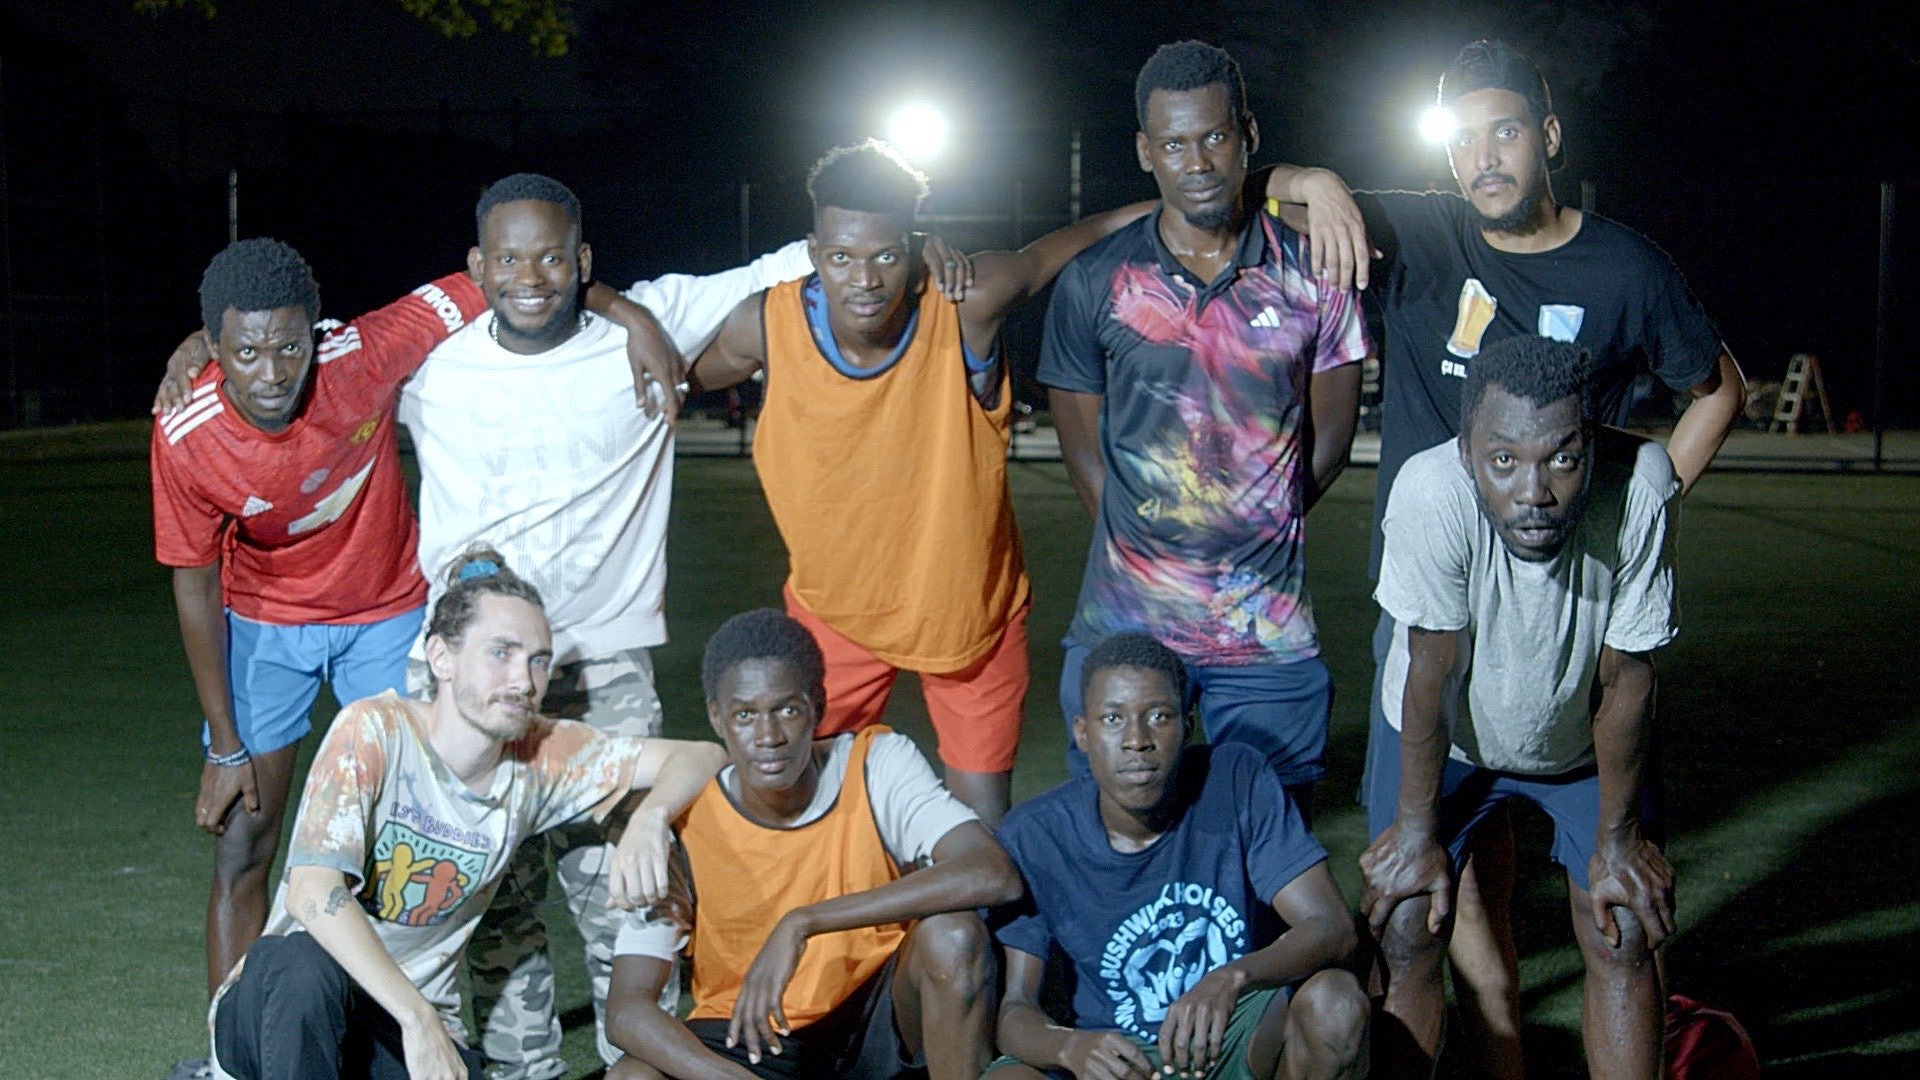 Asylum seekers from Mauritania pose for a photo after a Wednesday night scrimmage in September 2023 at Grover Cleveland Park in Ridgewood Queens.